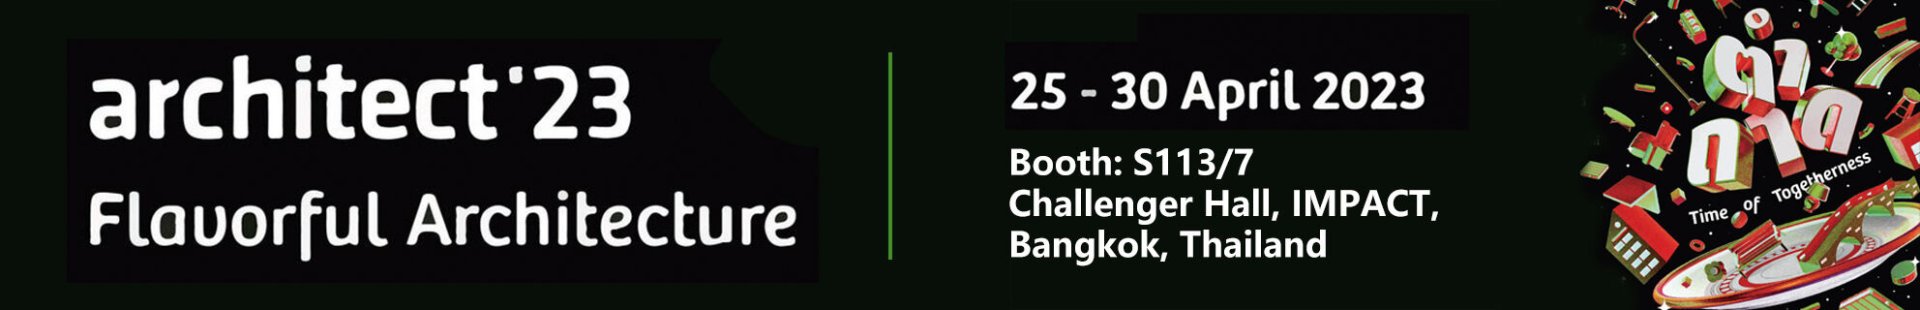 Mechanical parking manufacturer Mutrade at the Architect'23 exhibition in Bangkok, Thailand